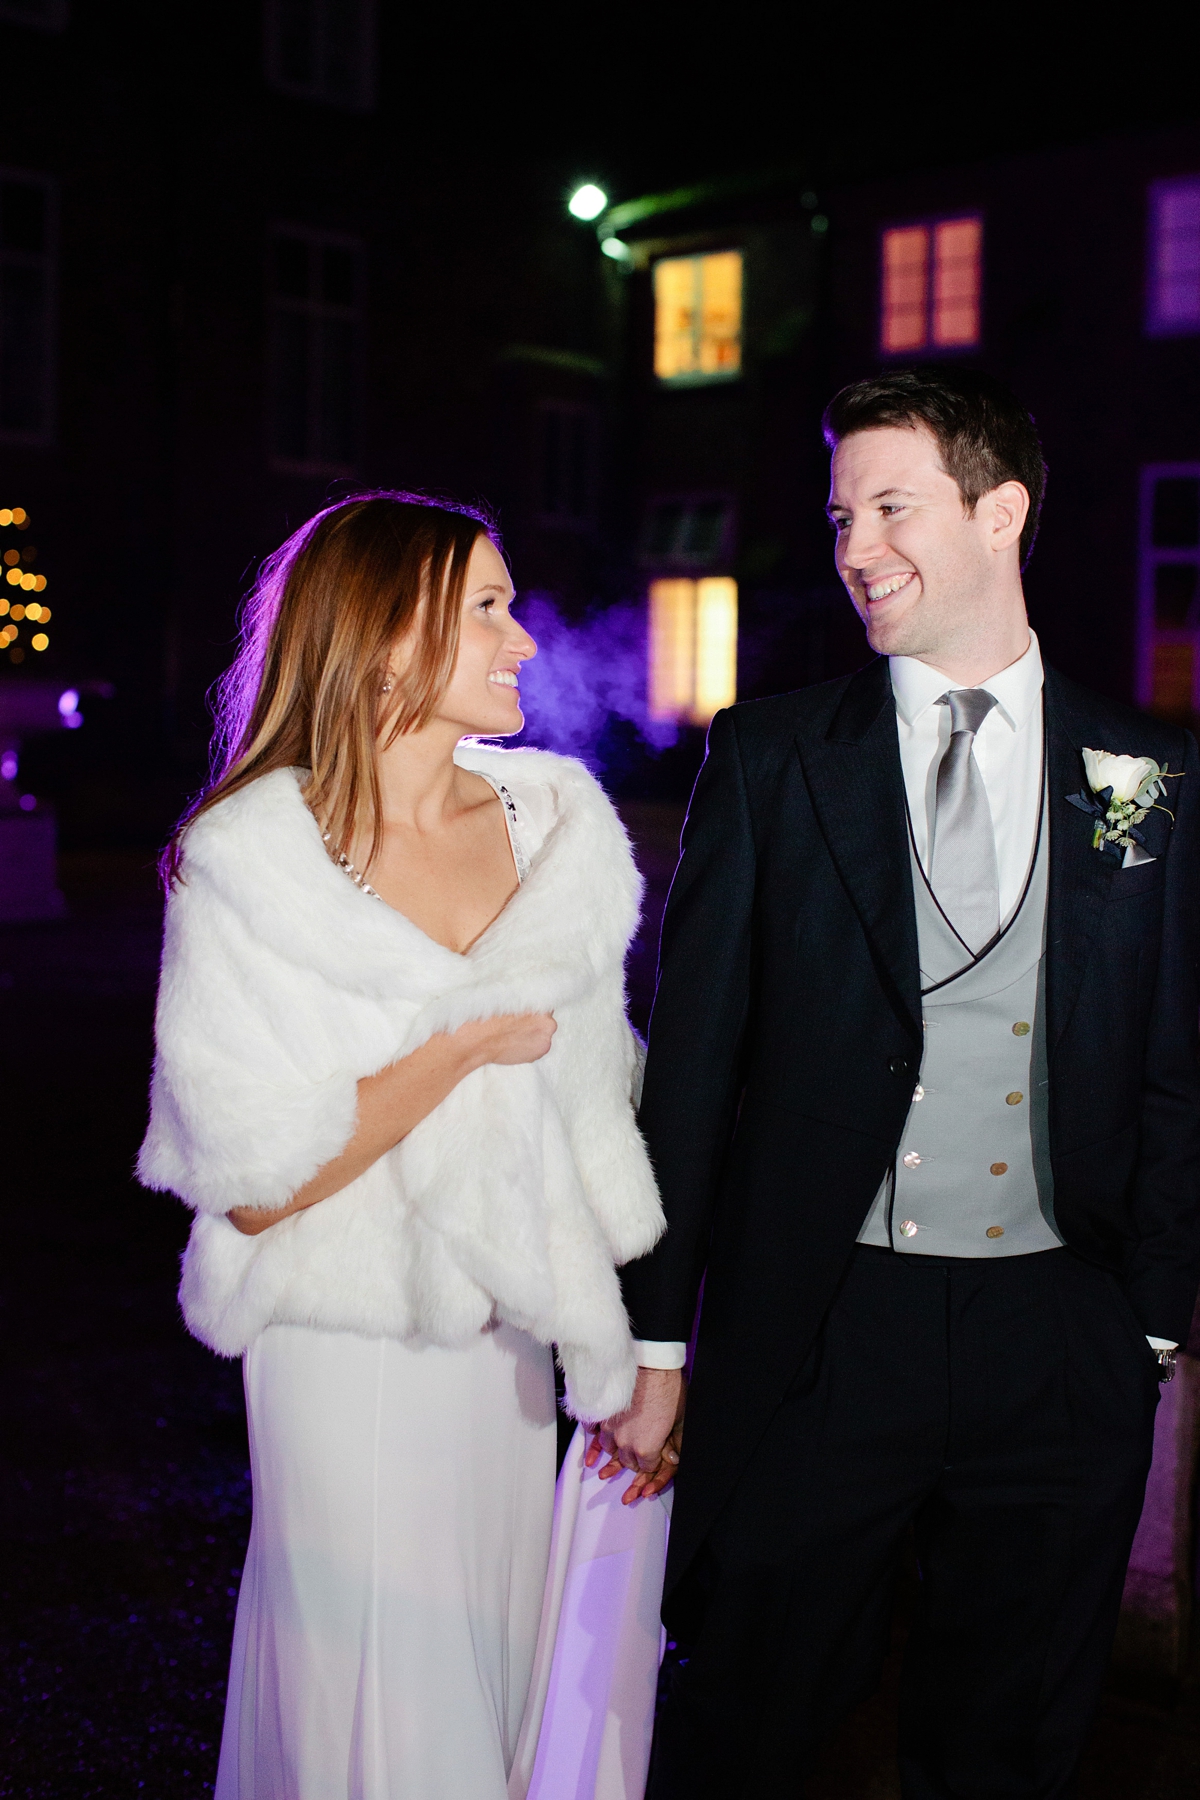 26 A bride in Temperley London for a sophisticated and elegant Winter wedding